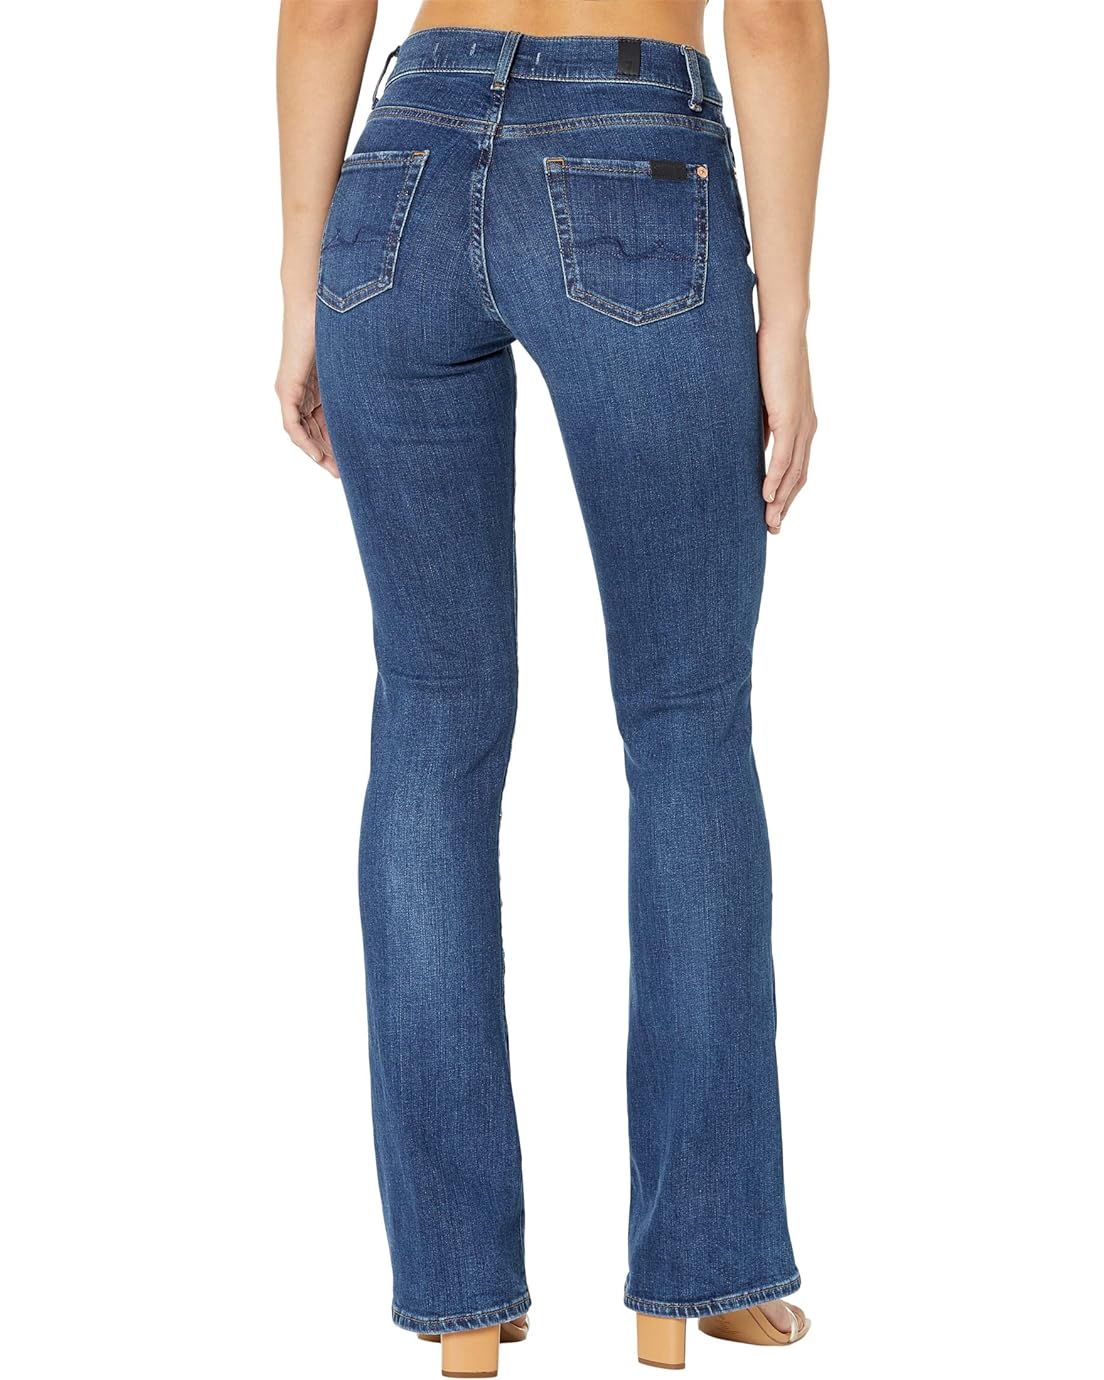  7 For All Mankind Slim Illusion Bootcut in Highline